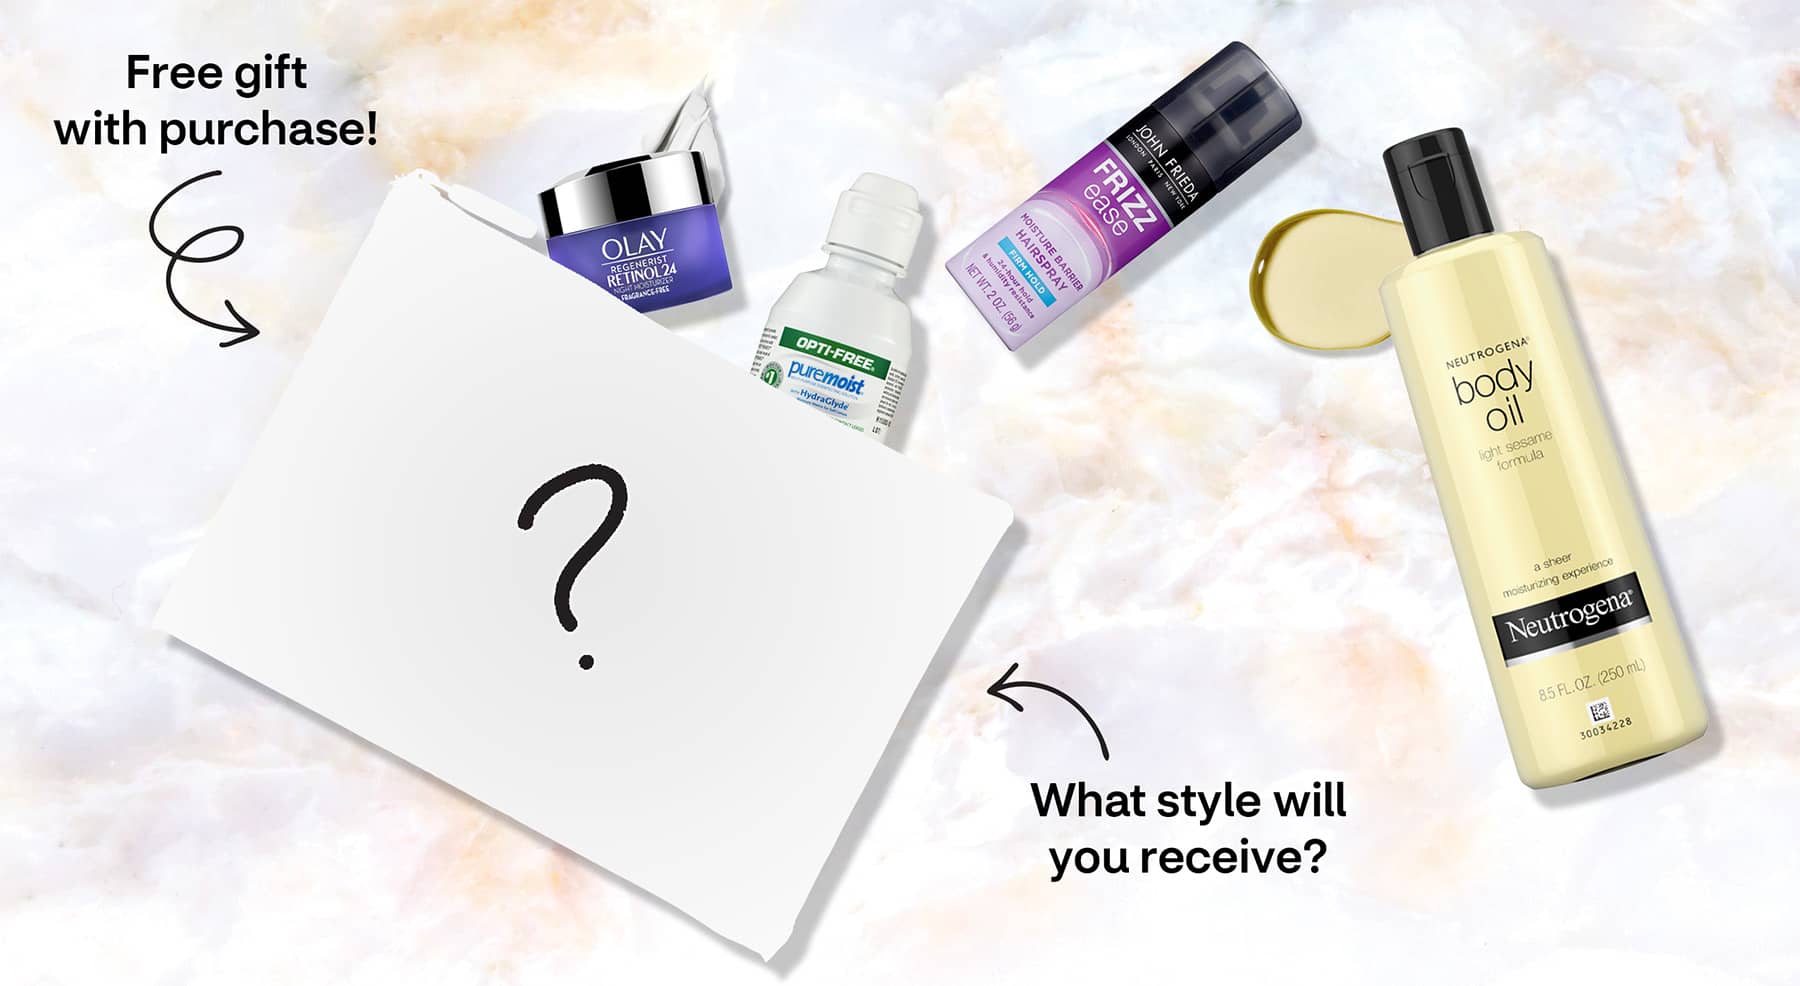 Free gift with purchase! What style will you receive? arrows point to pouch with a large question mark, amid examples of travel size products.